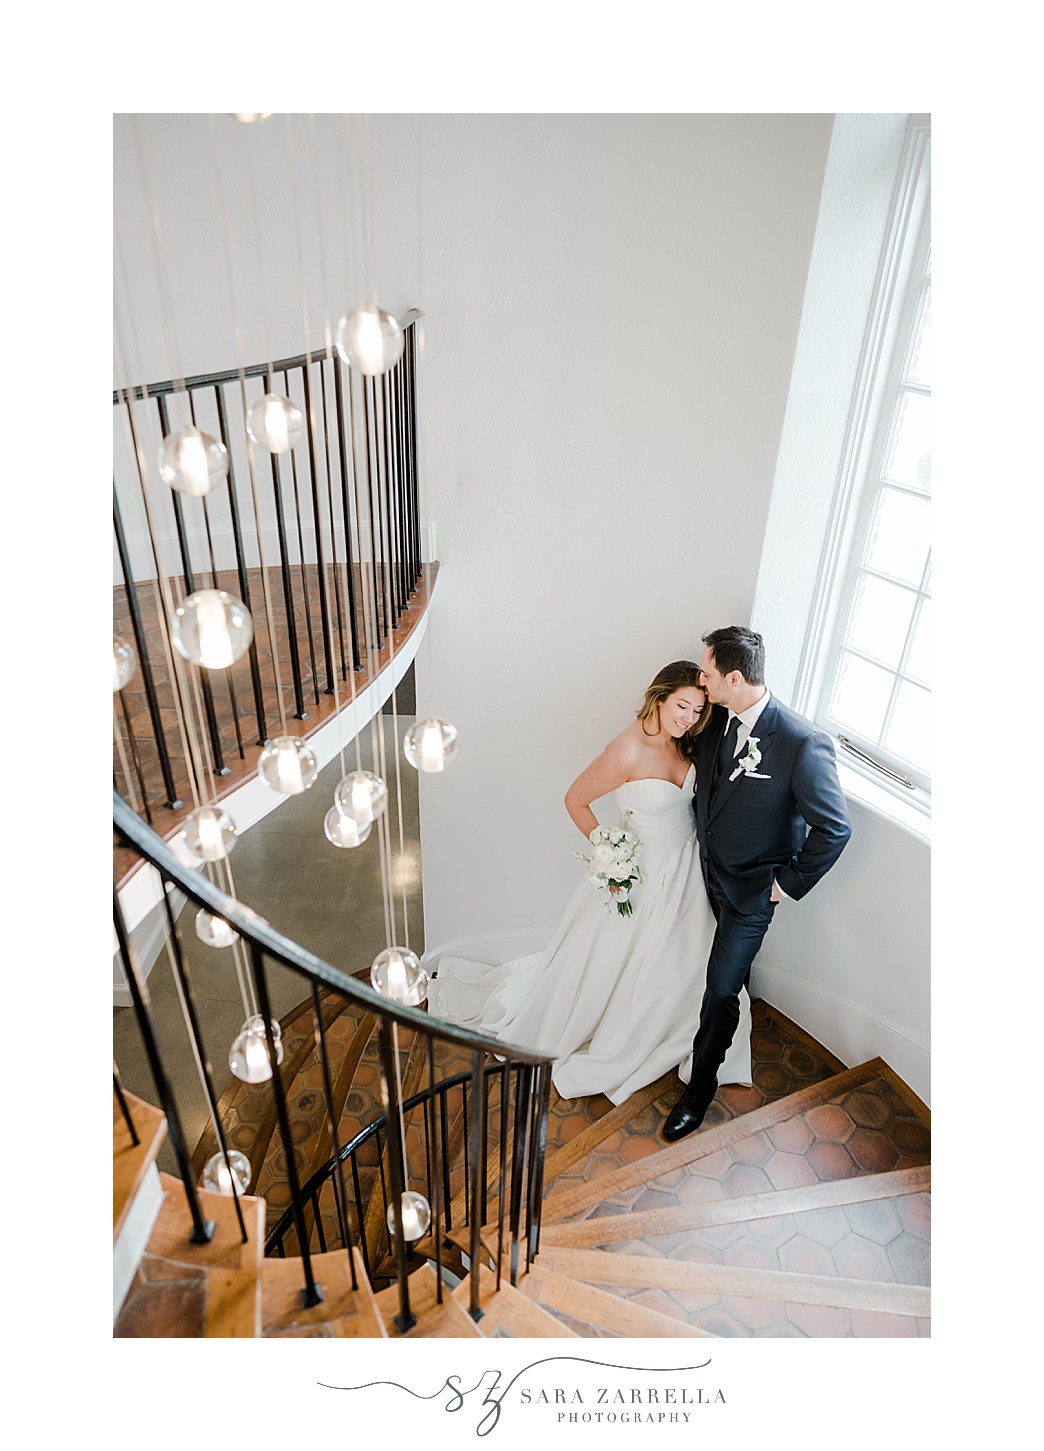 romantic wedding portrait on staircase at Shepard's Run with hanging bulbs